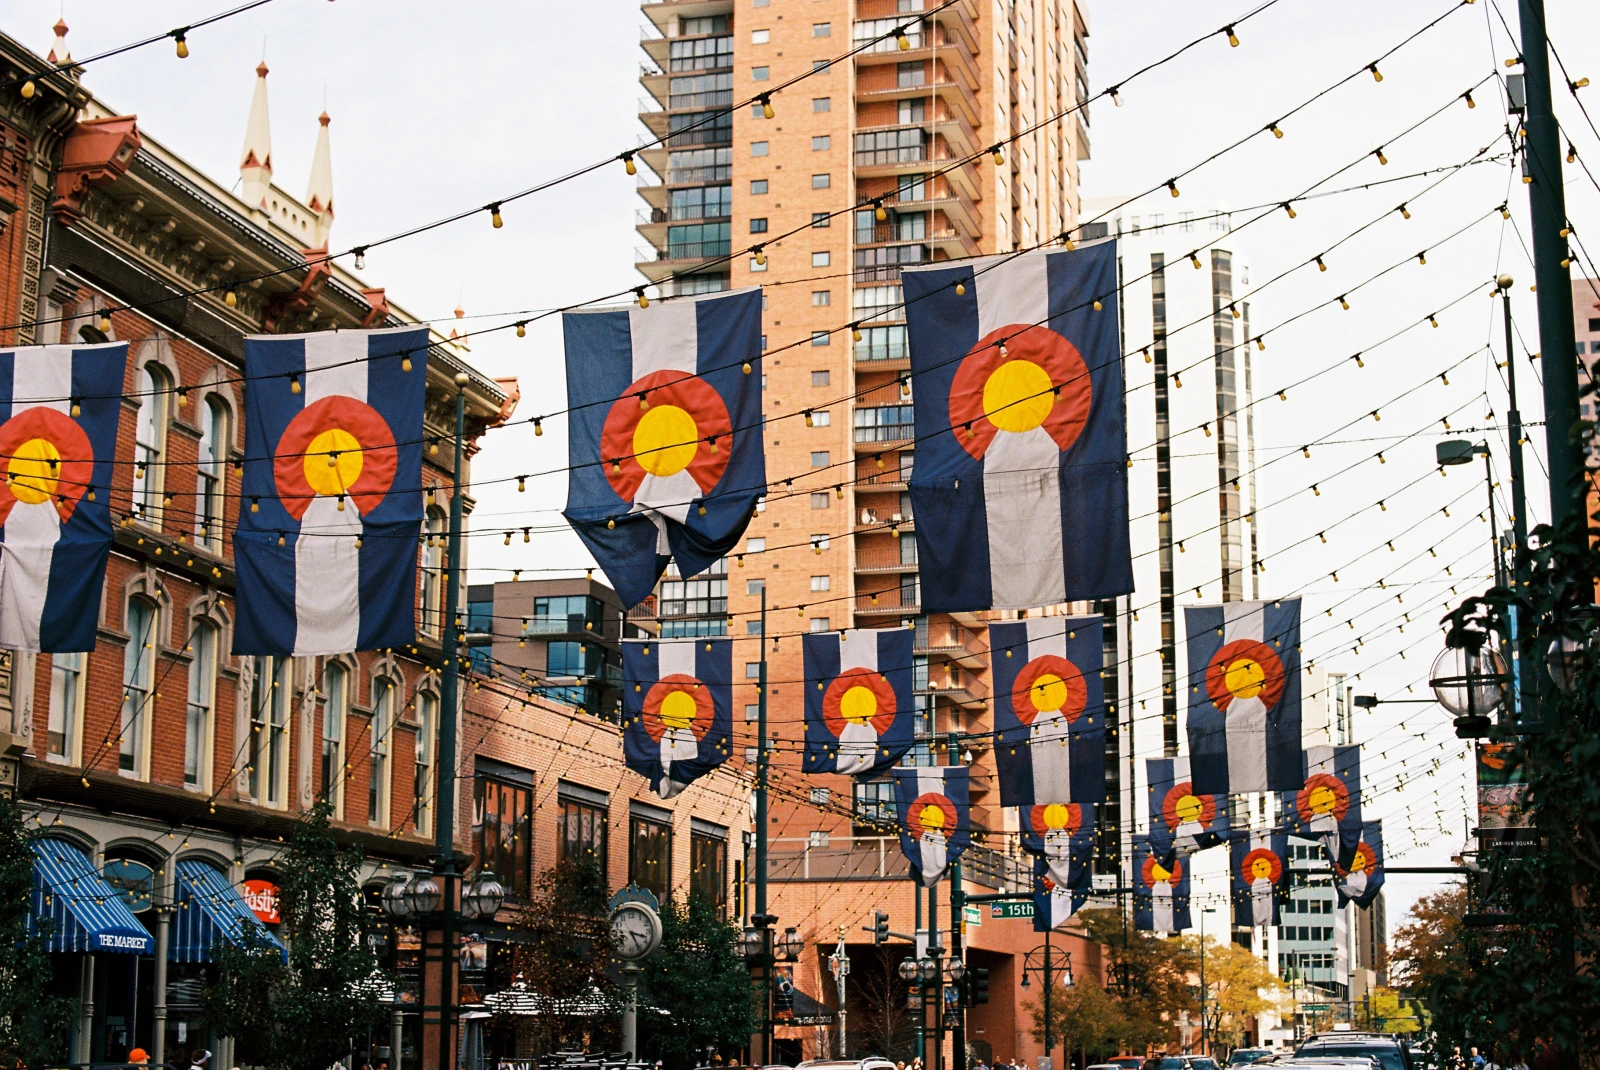 colorado flags hanging from buildings with cloudy skies